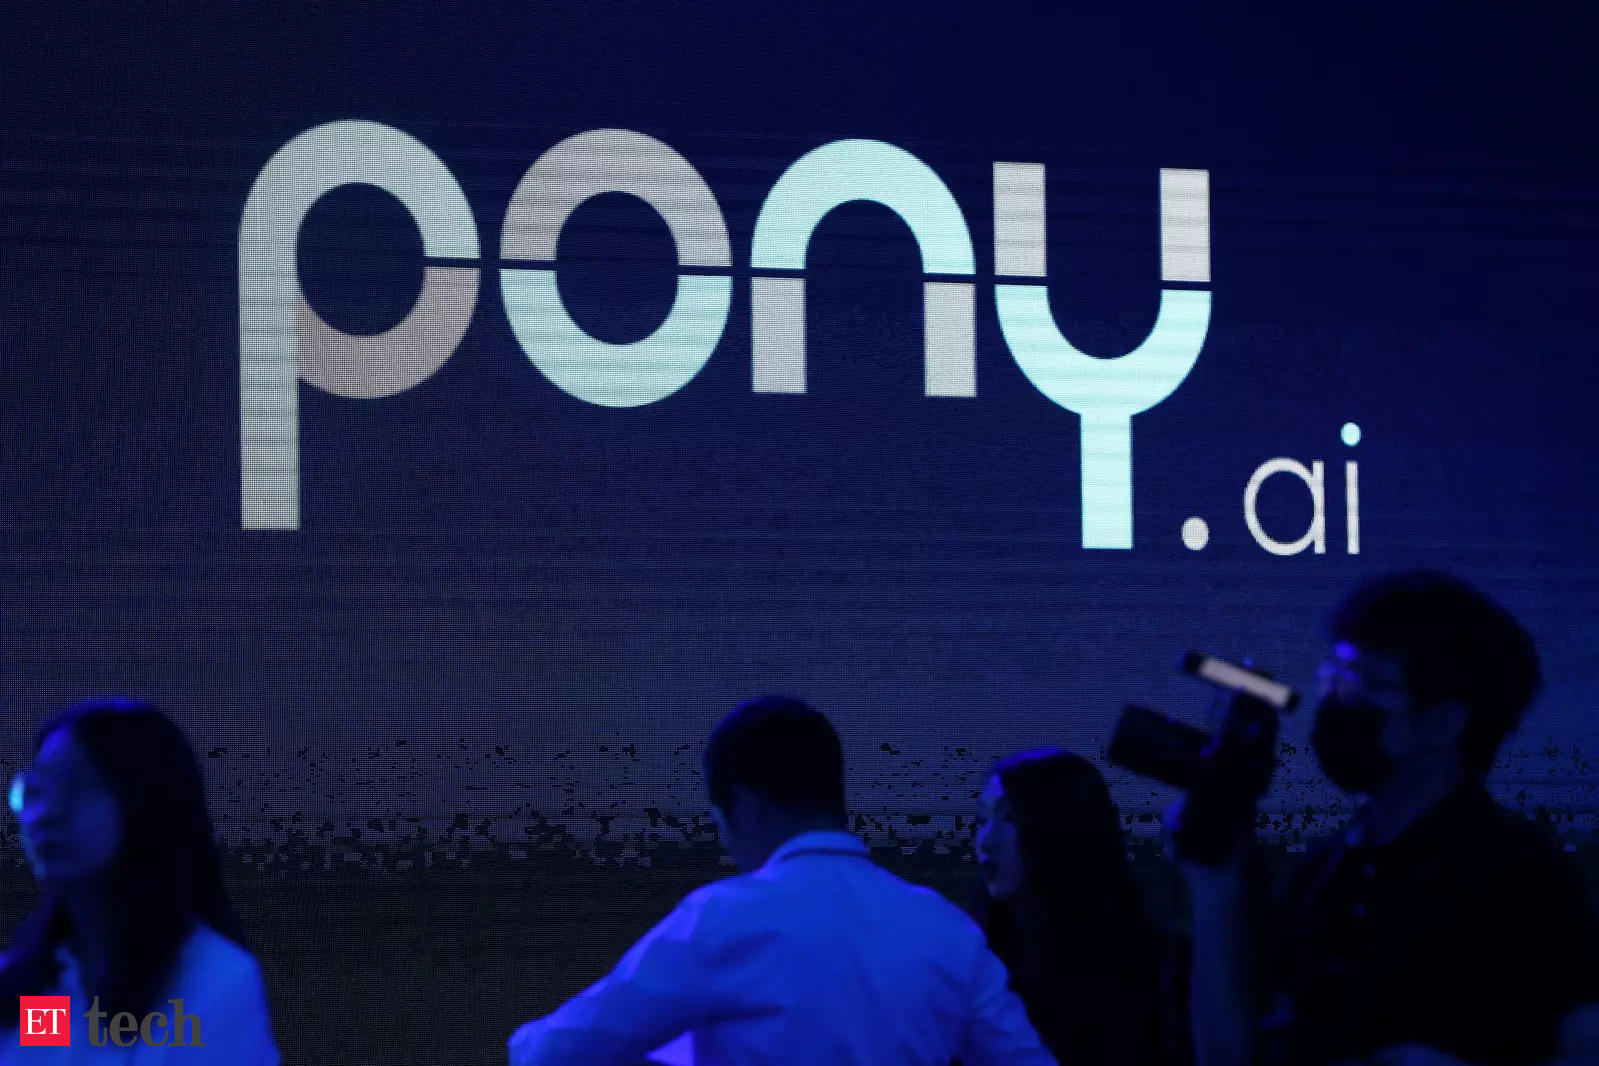  Robotaxi startup Pony.ai gains taxi license in China city